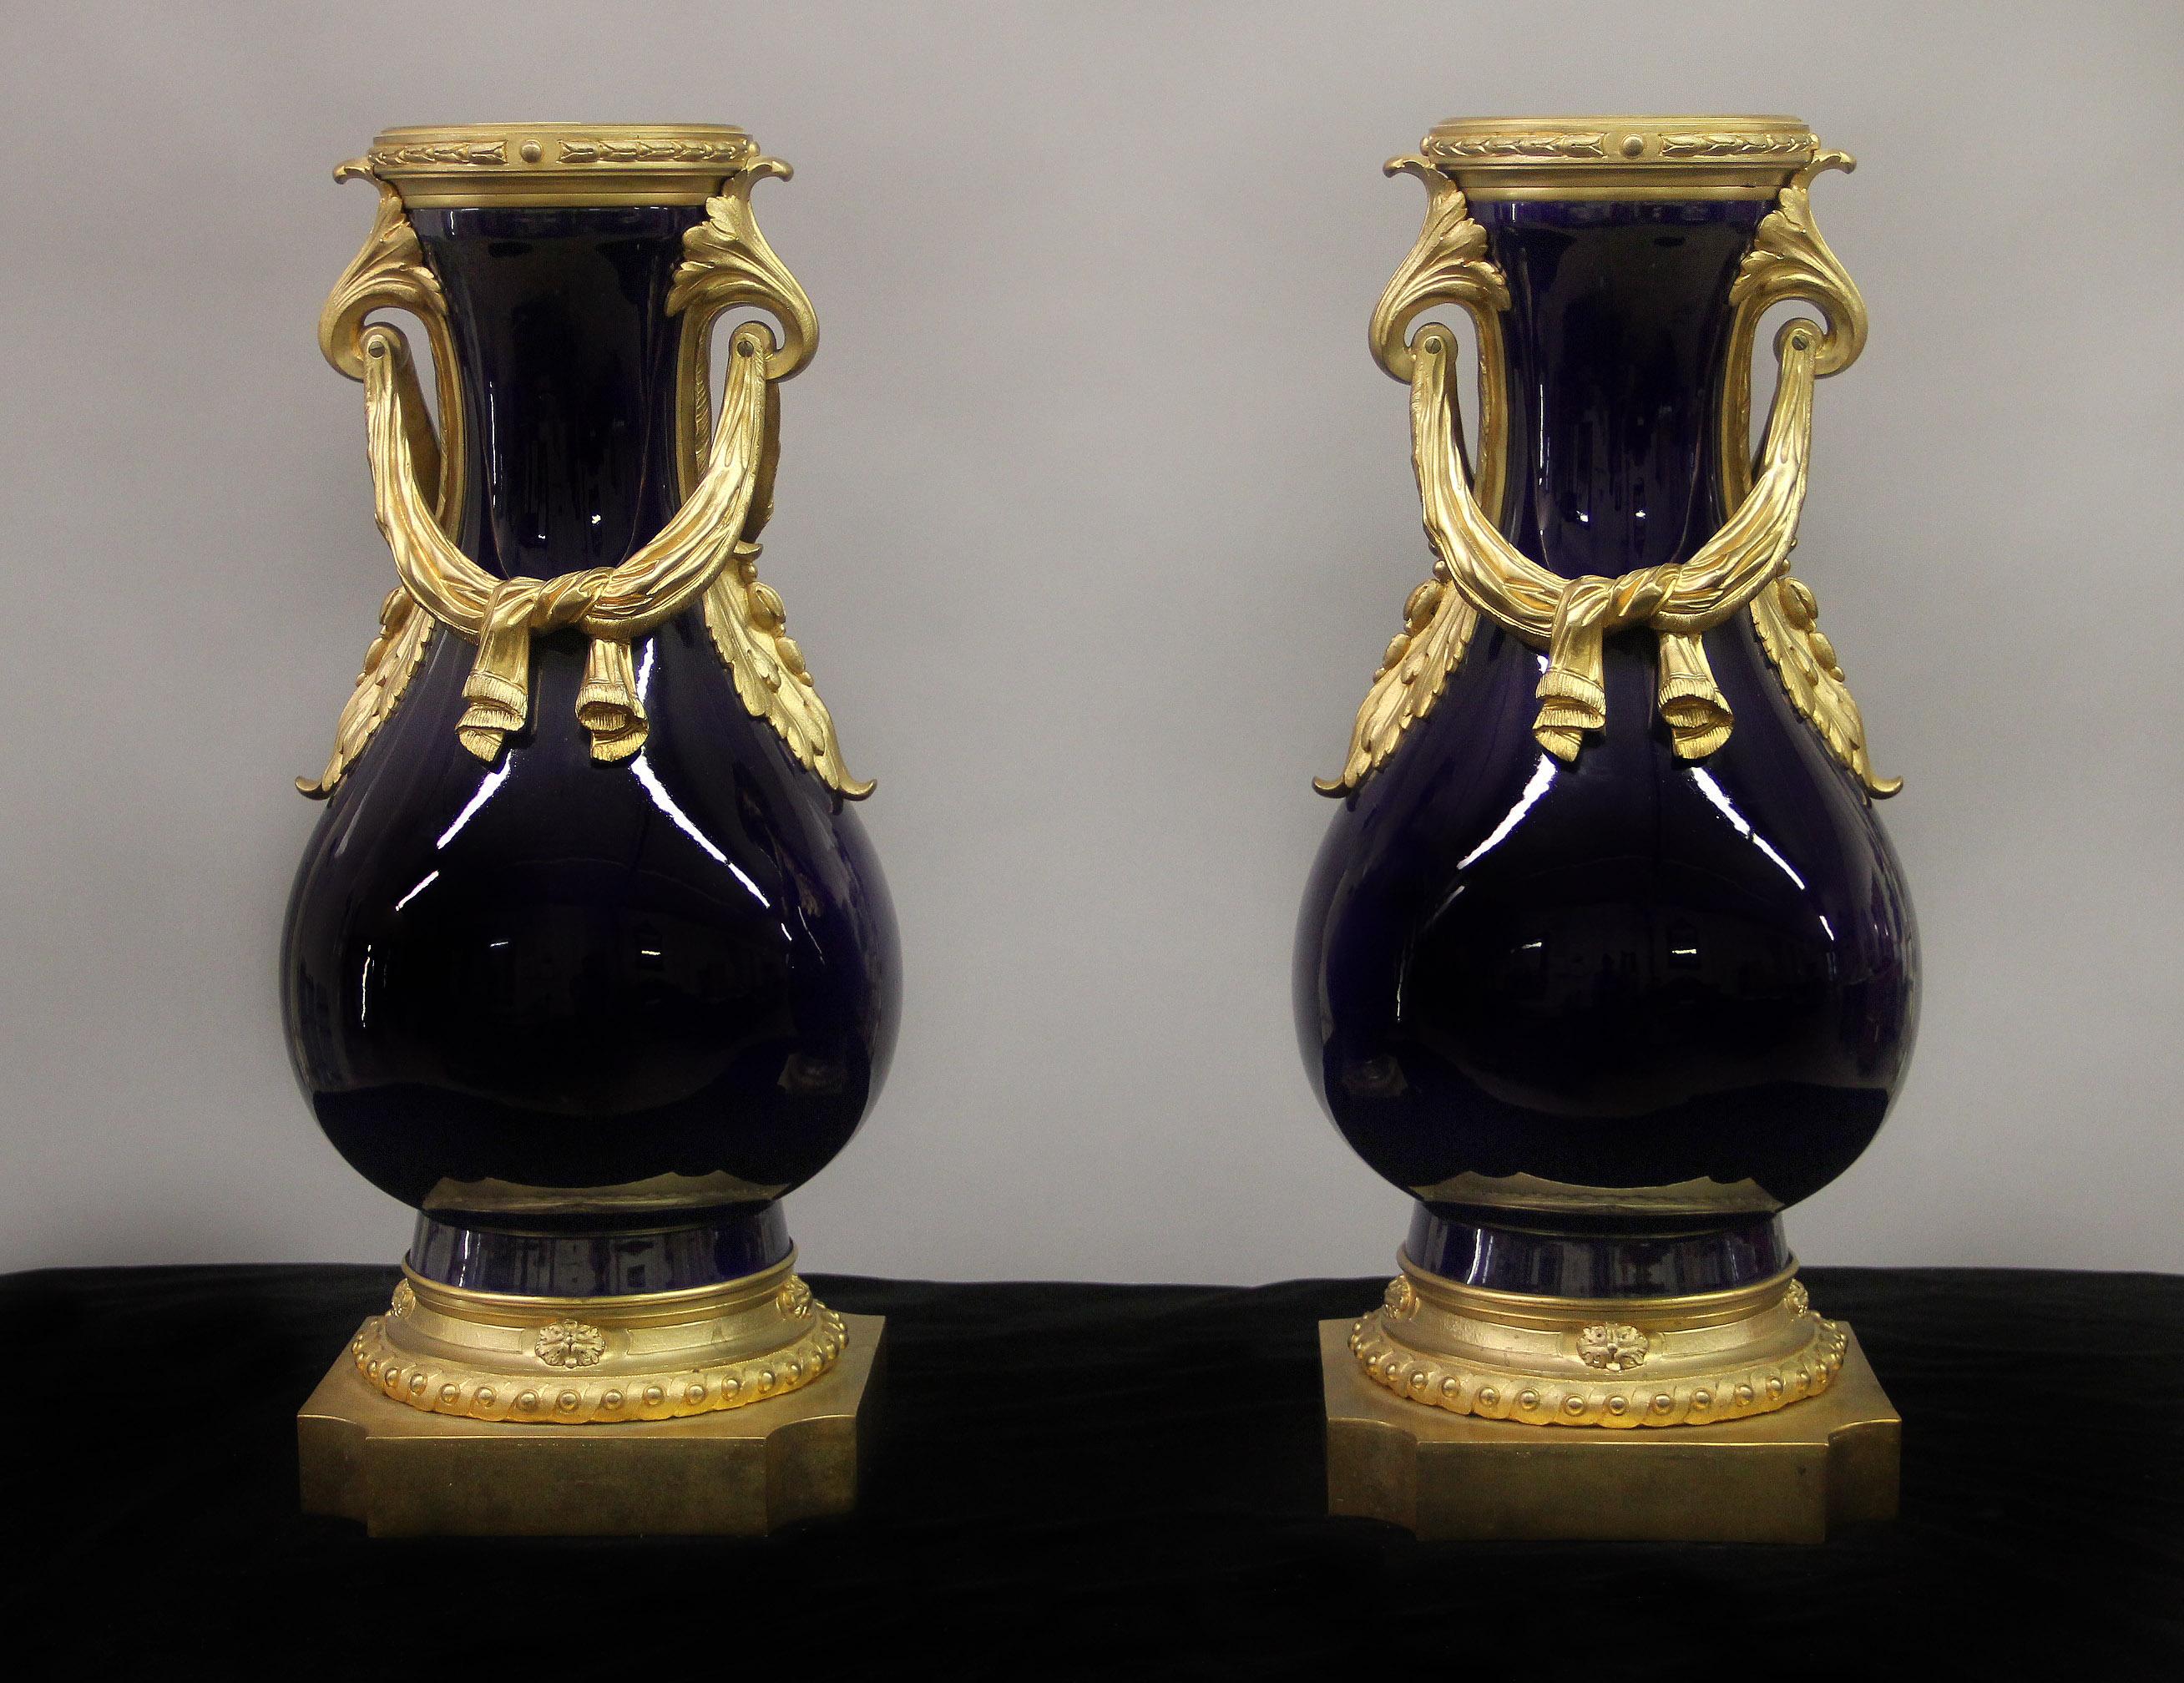 A fine pair of late 19th century gilt bronze mounted Sèvres style porcelain vase.

The cobalt blue vases mounted with tied bronze drapes and handles. 

In late 1739-early 1740 the Sèvres Porcelain Factory opened in the Royal Château of